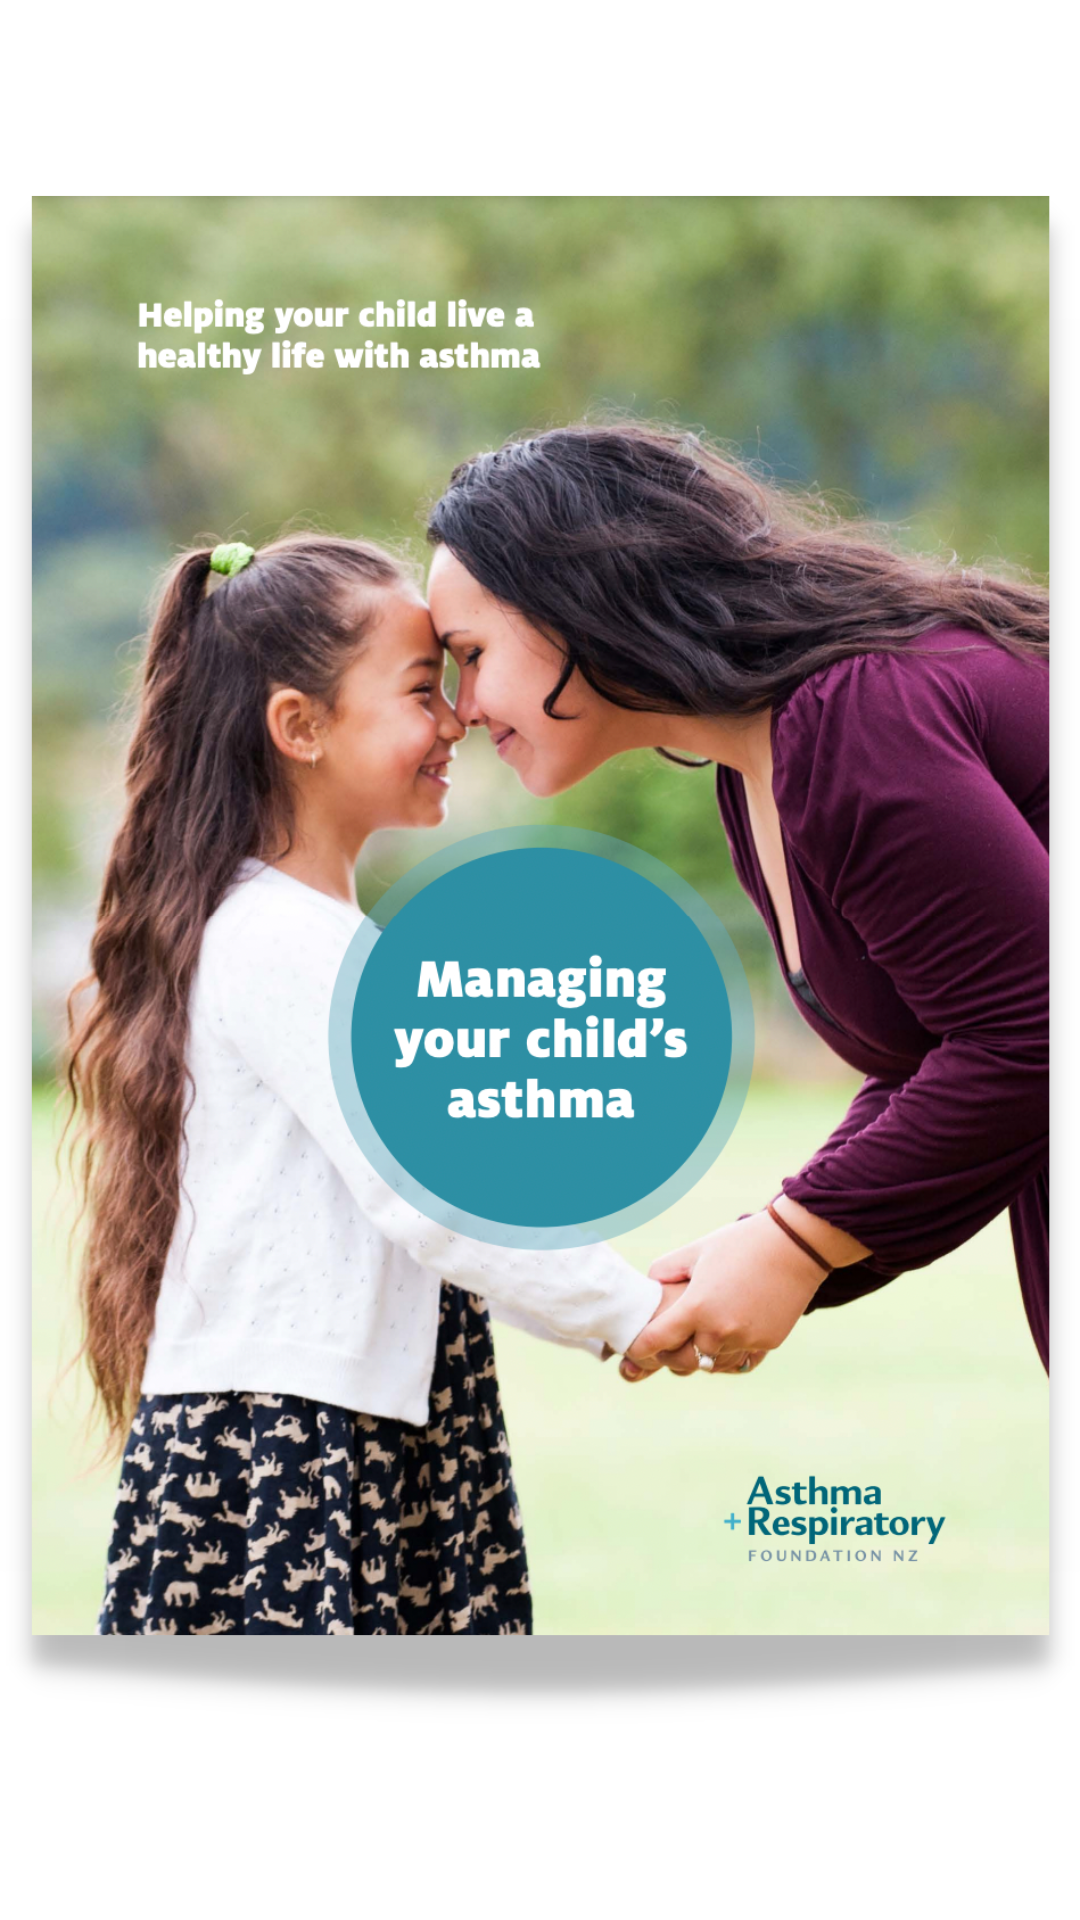 Managing your child's asthma